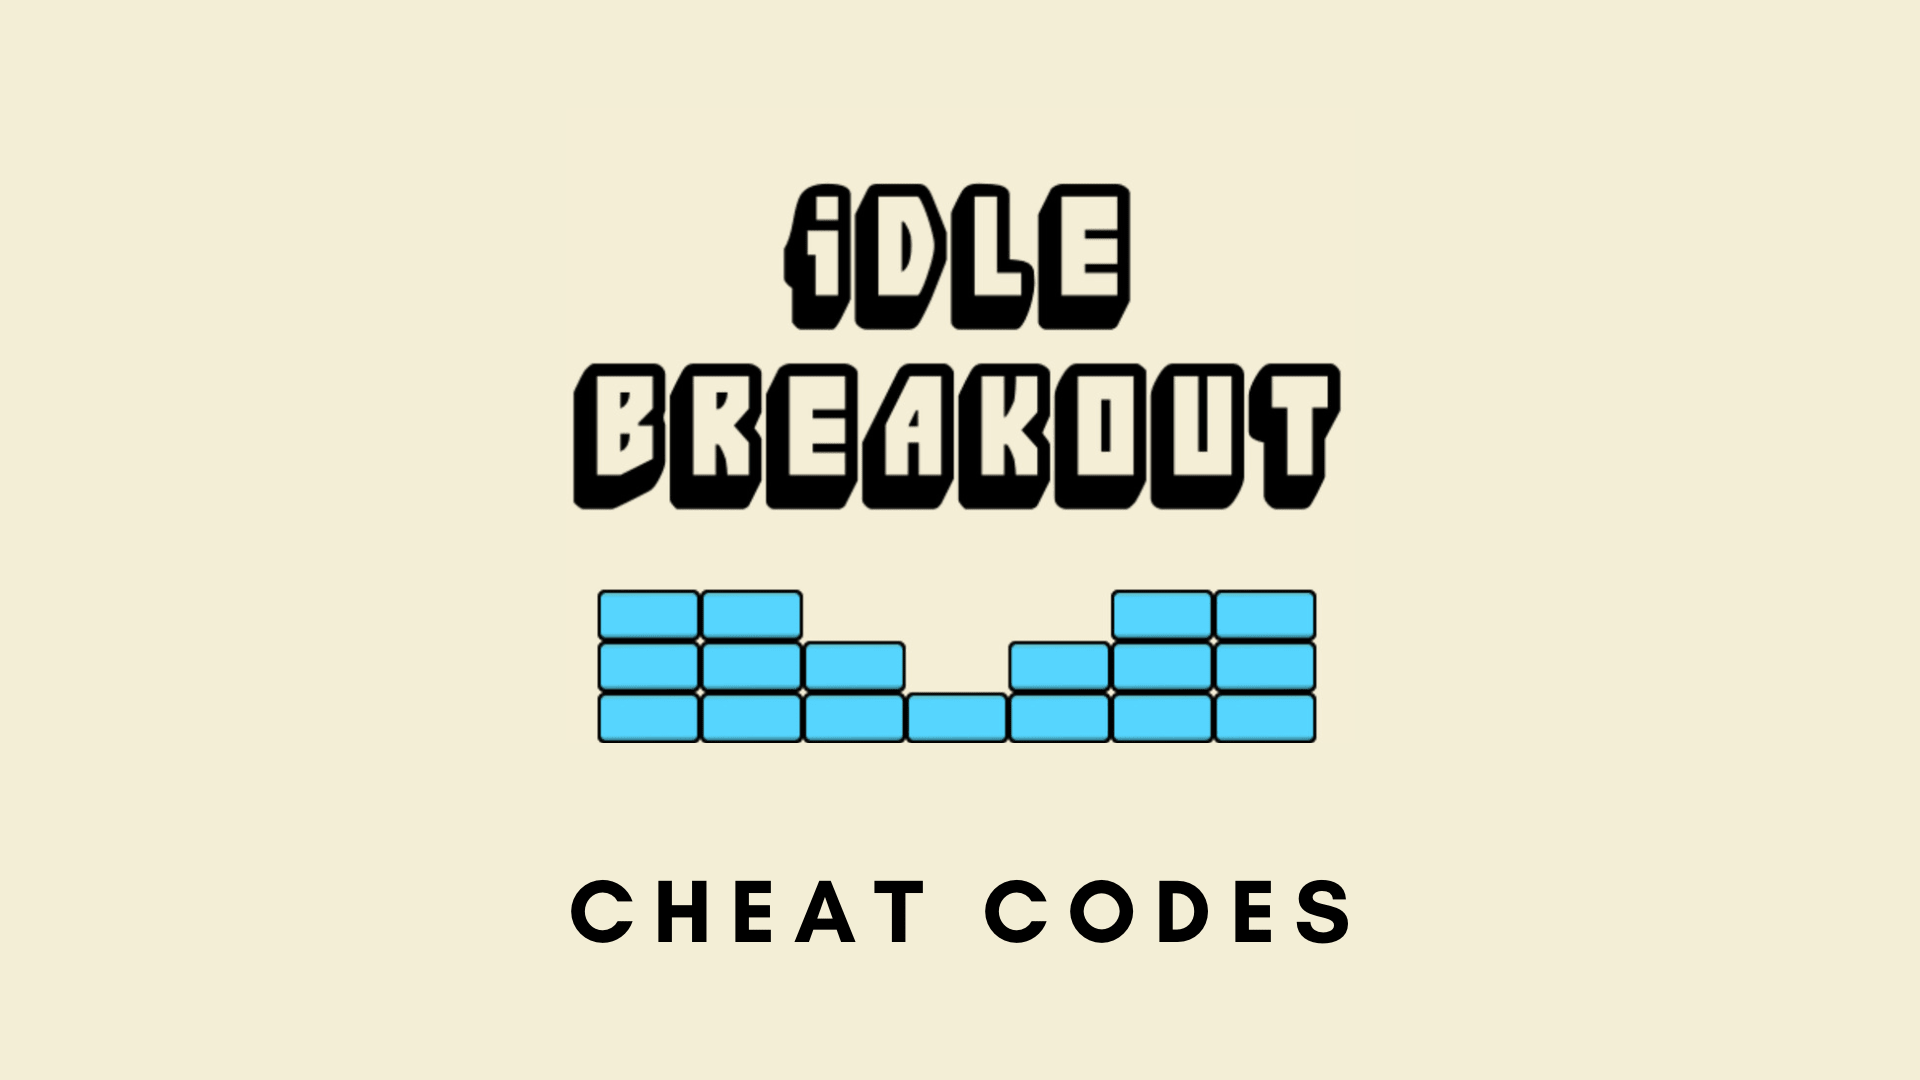 Idle Breakout Cheat Codes and Console Commands